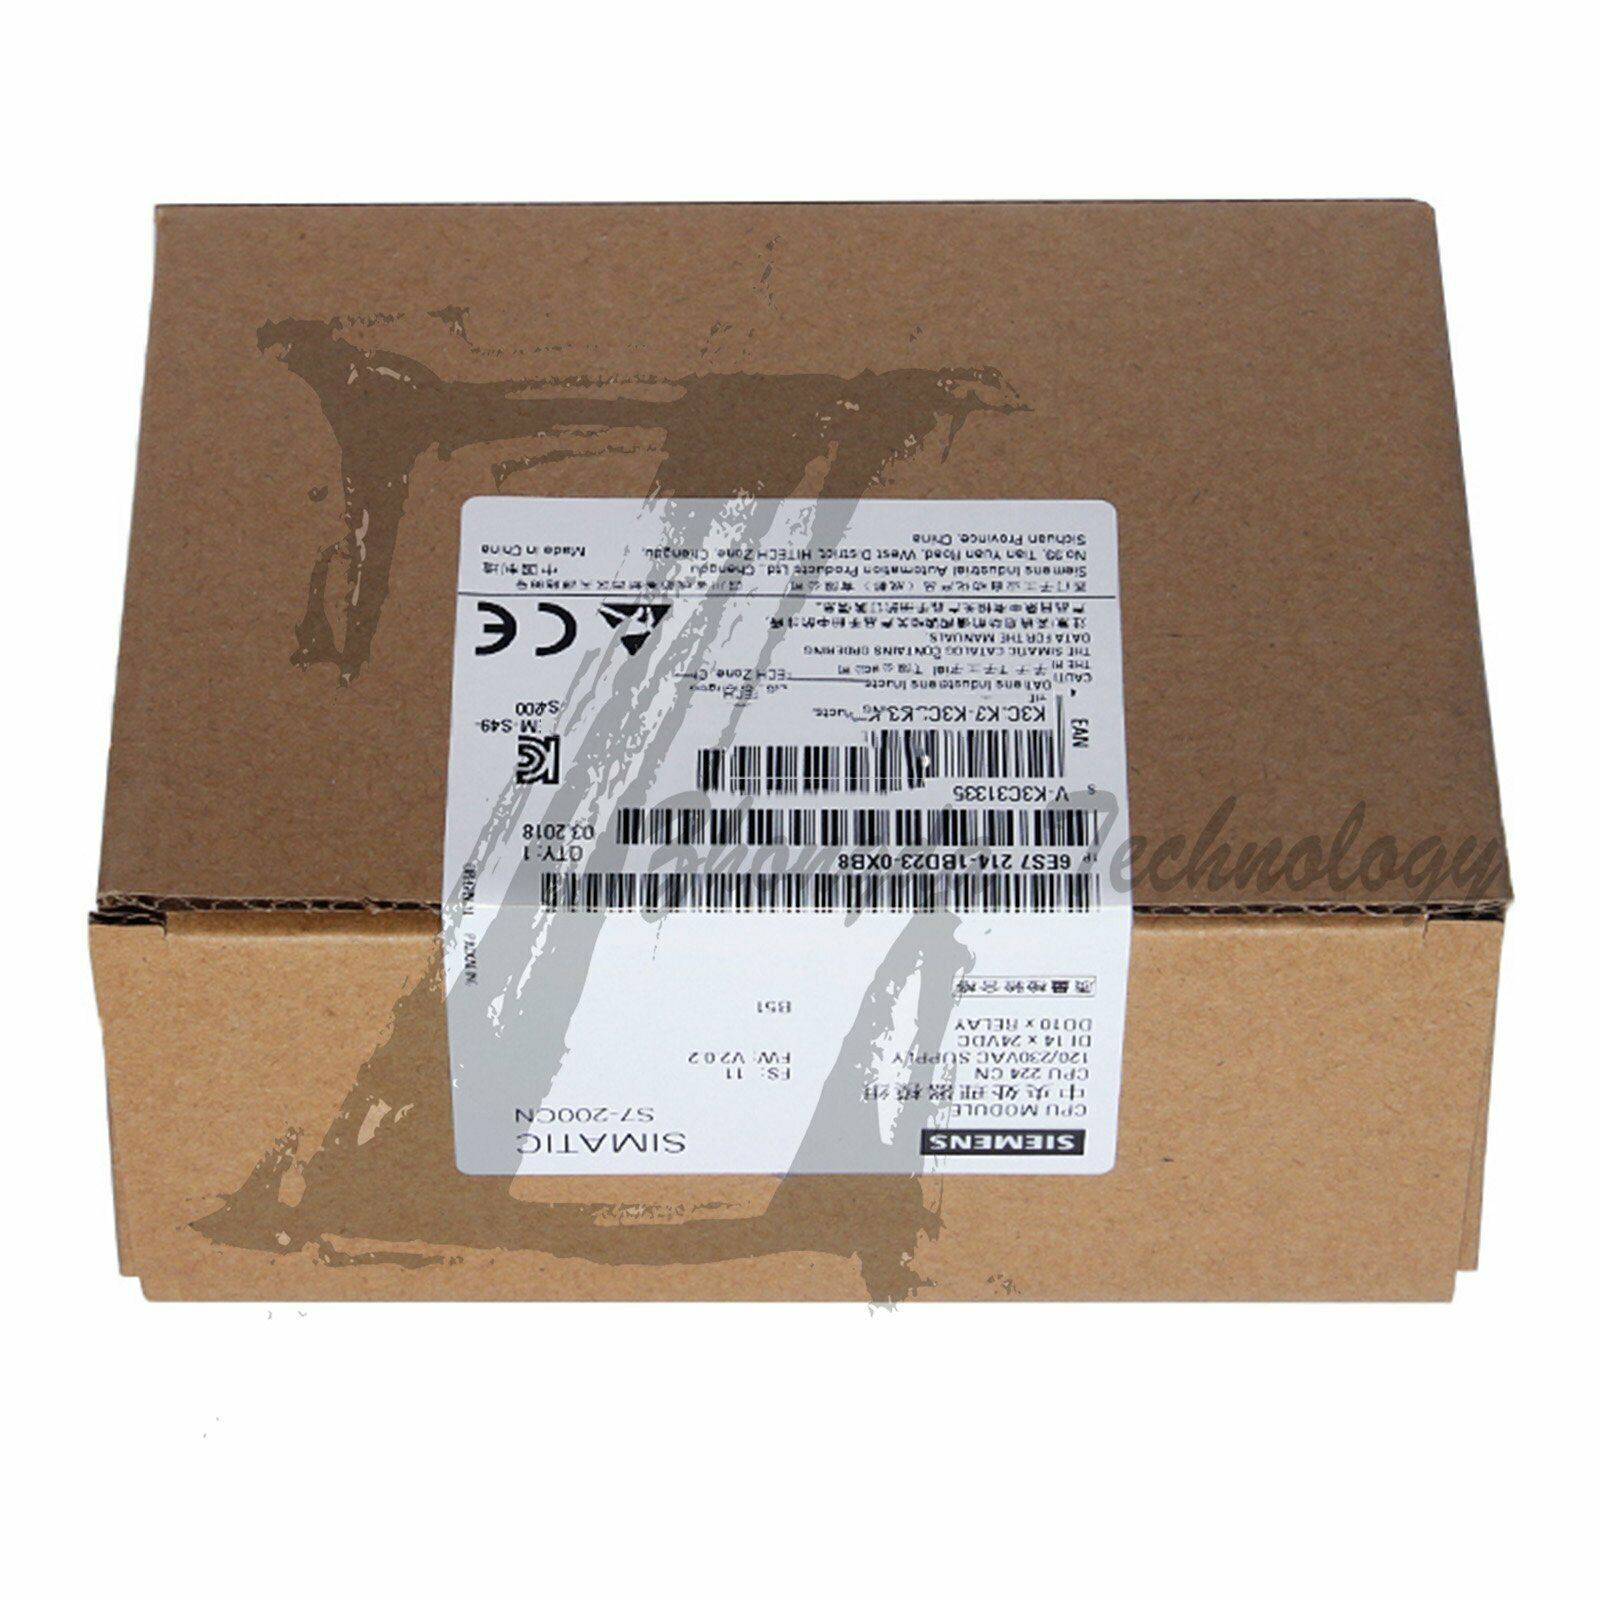 1PC NEW IN BOX SIEMENS PLC 6ES7 214-1BD23-0XB8 One year warrant KOEED 101-200, 90%, import_2020_10_10_031751, Other, Siemens